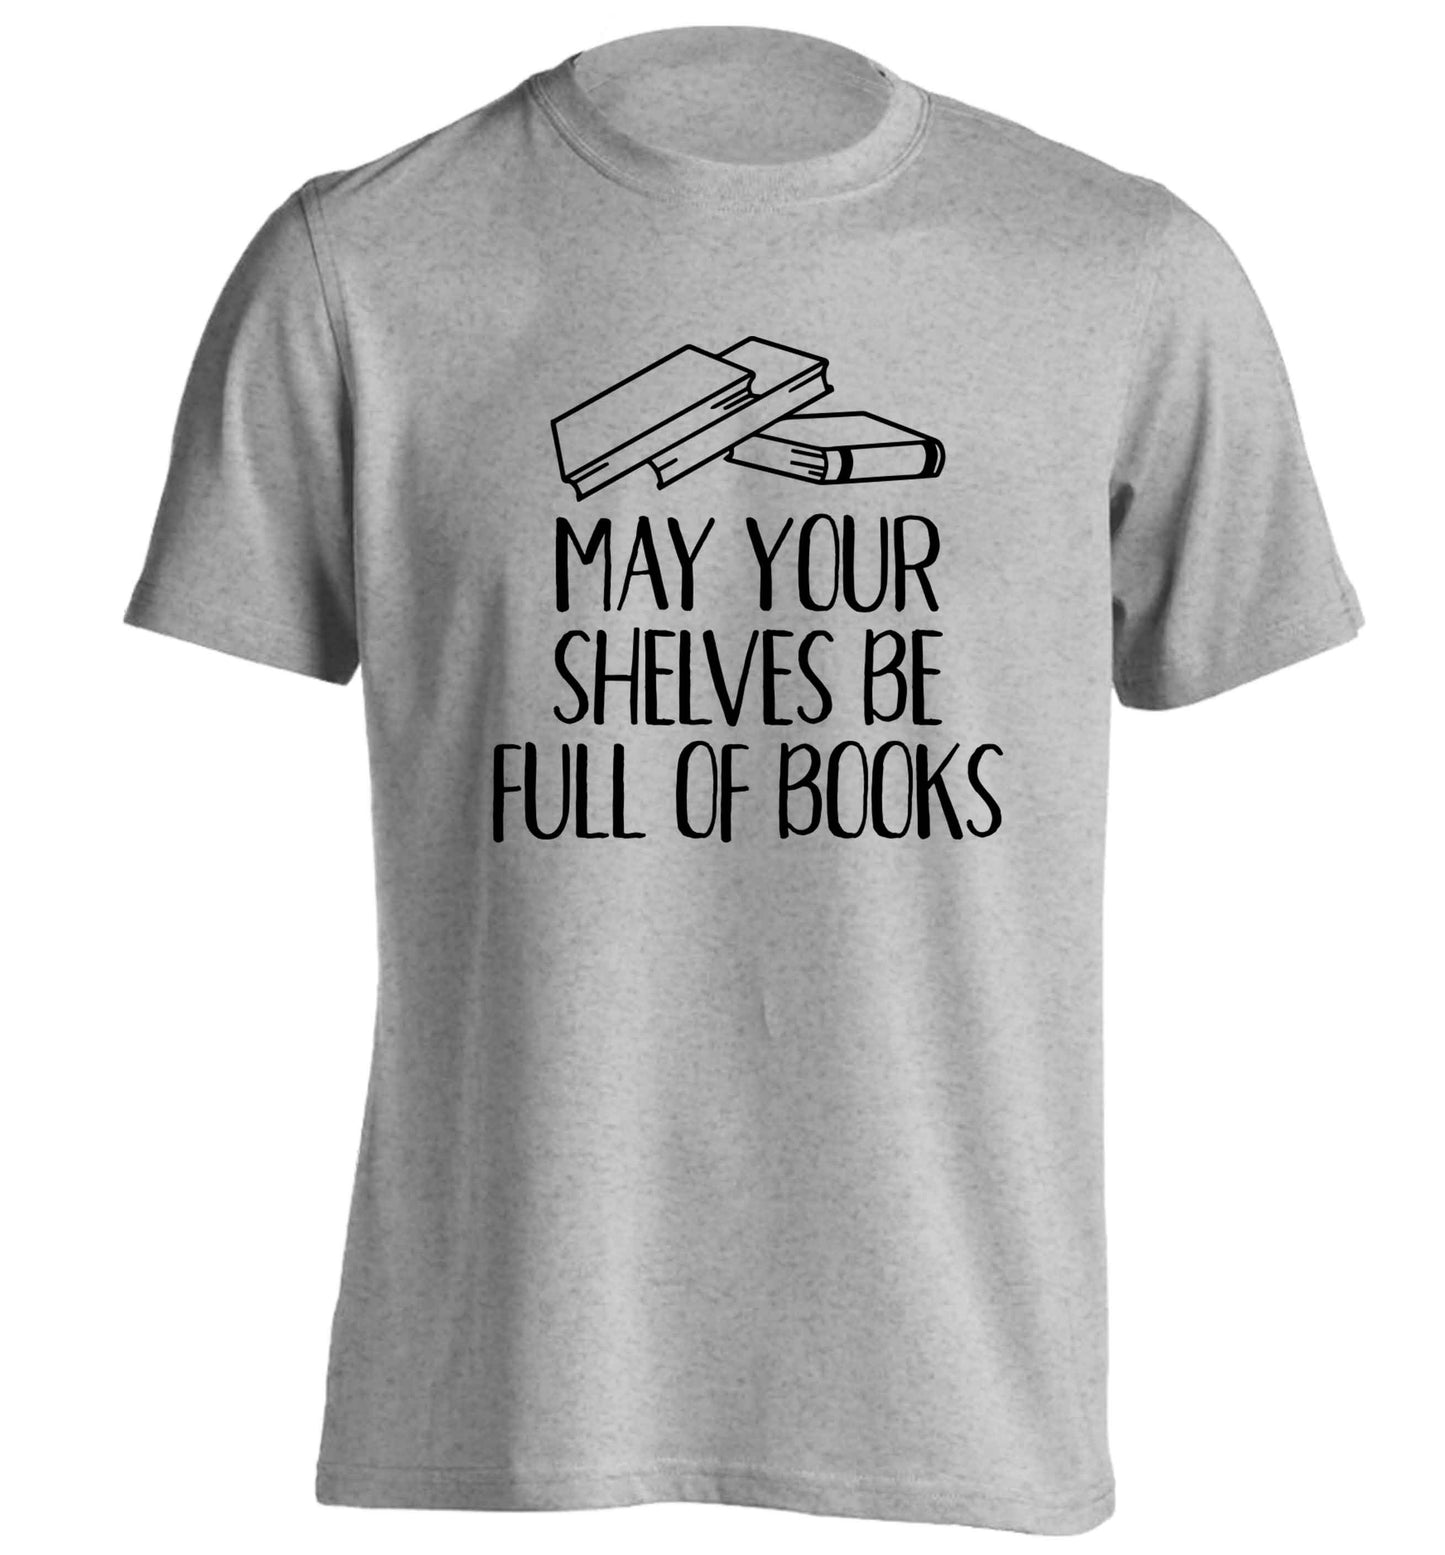 May your shelves be full of books adults unisex grey Tshirt 2XL